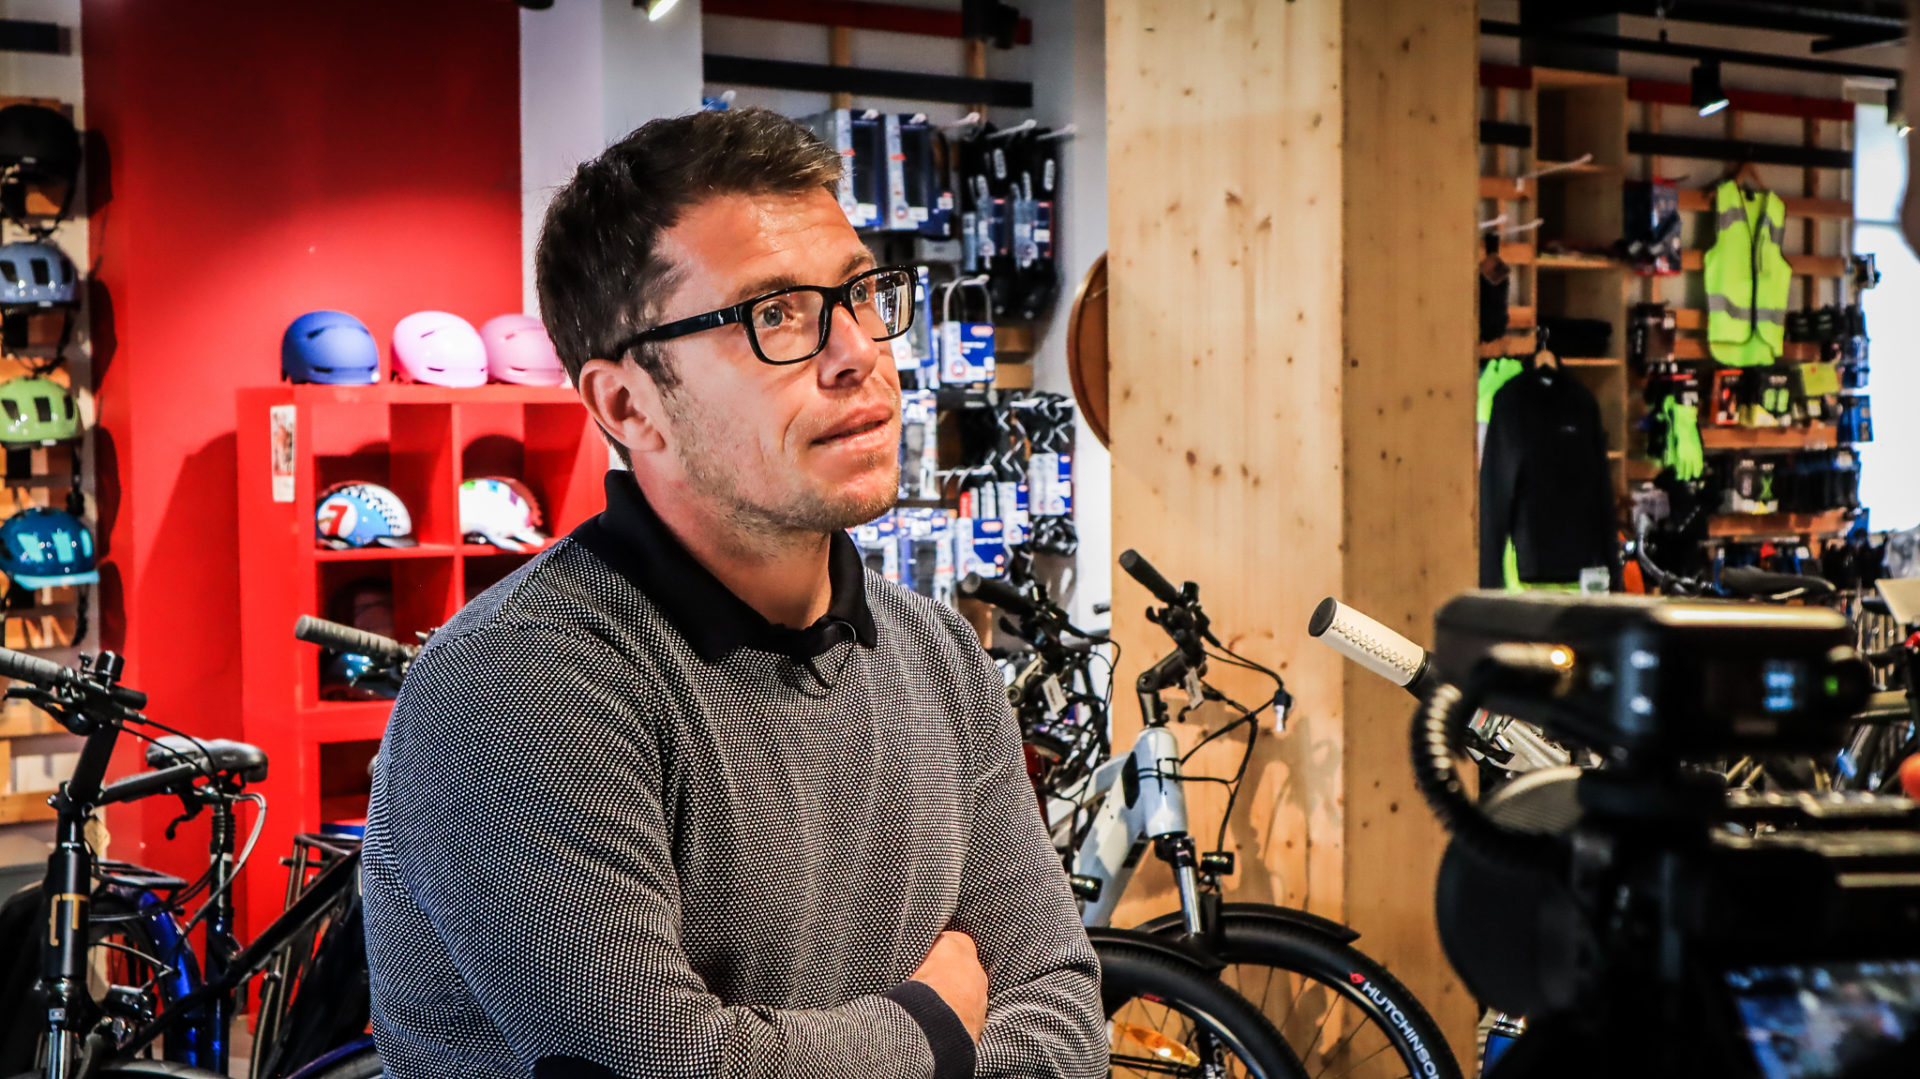 Weelz Visite Rennes Magasin Velo Cyclable 2021 8735